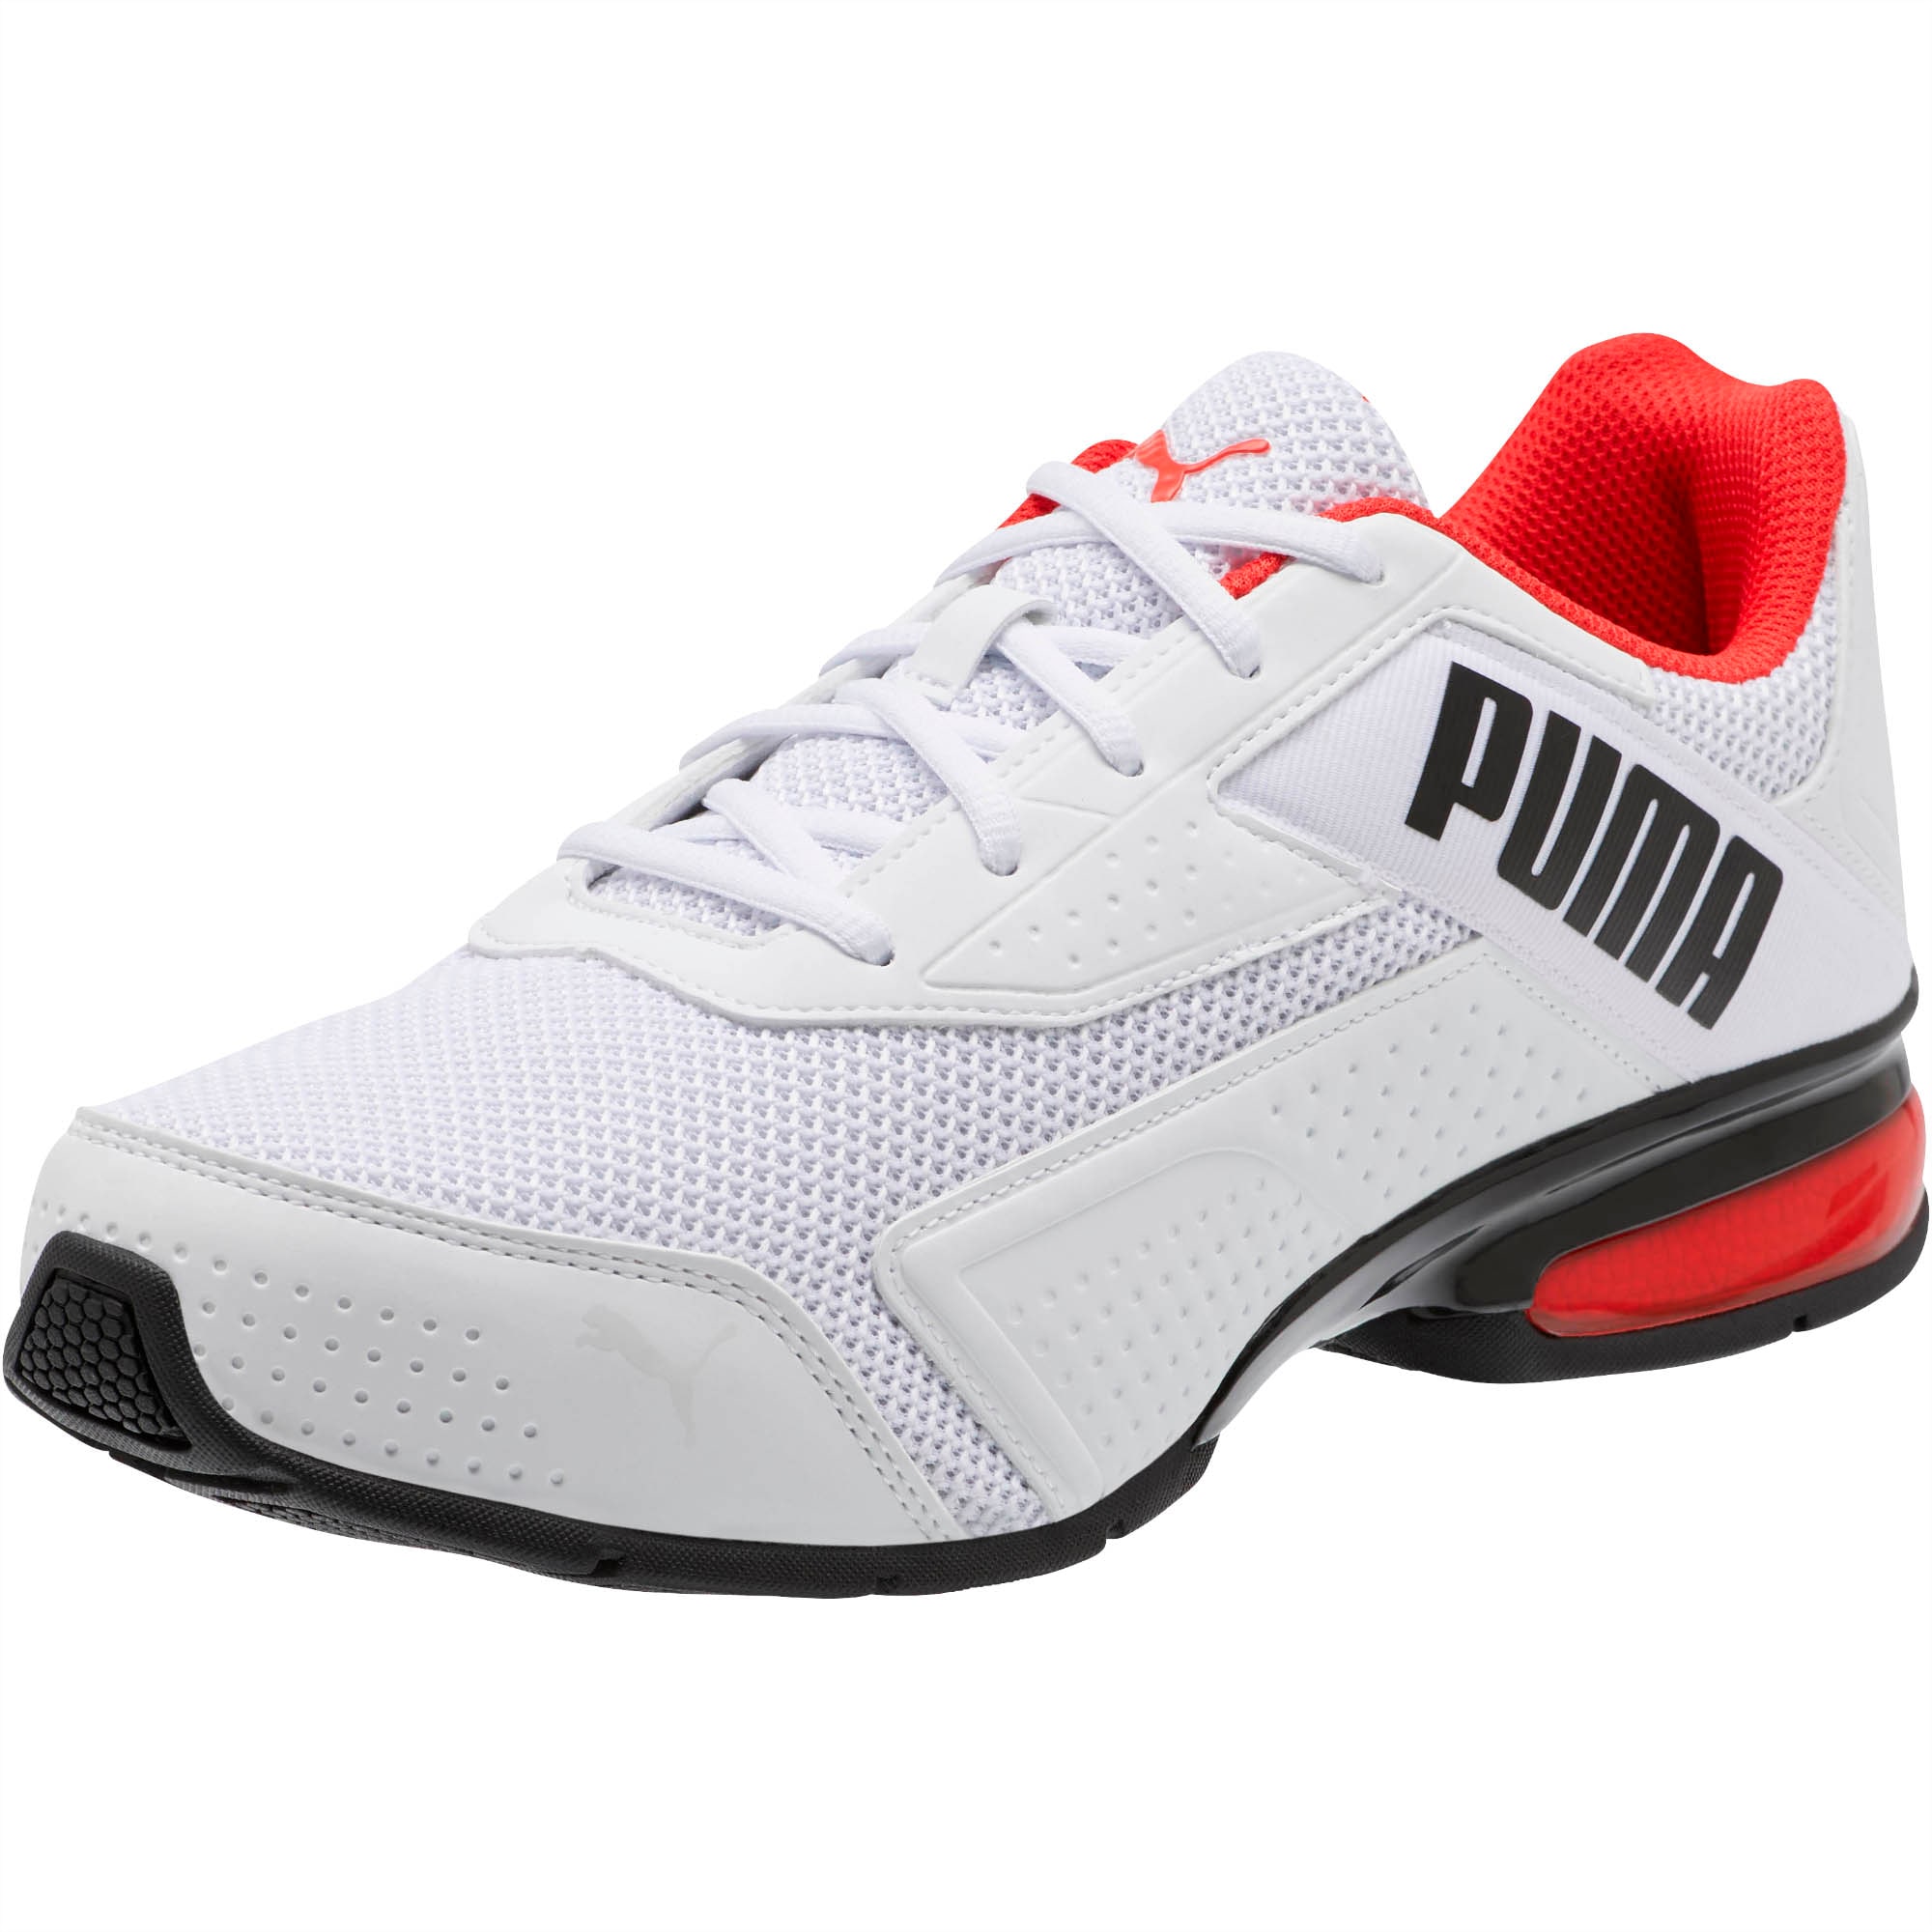 puma outlet vermont off 62% - www 